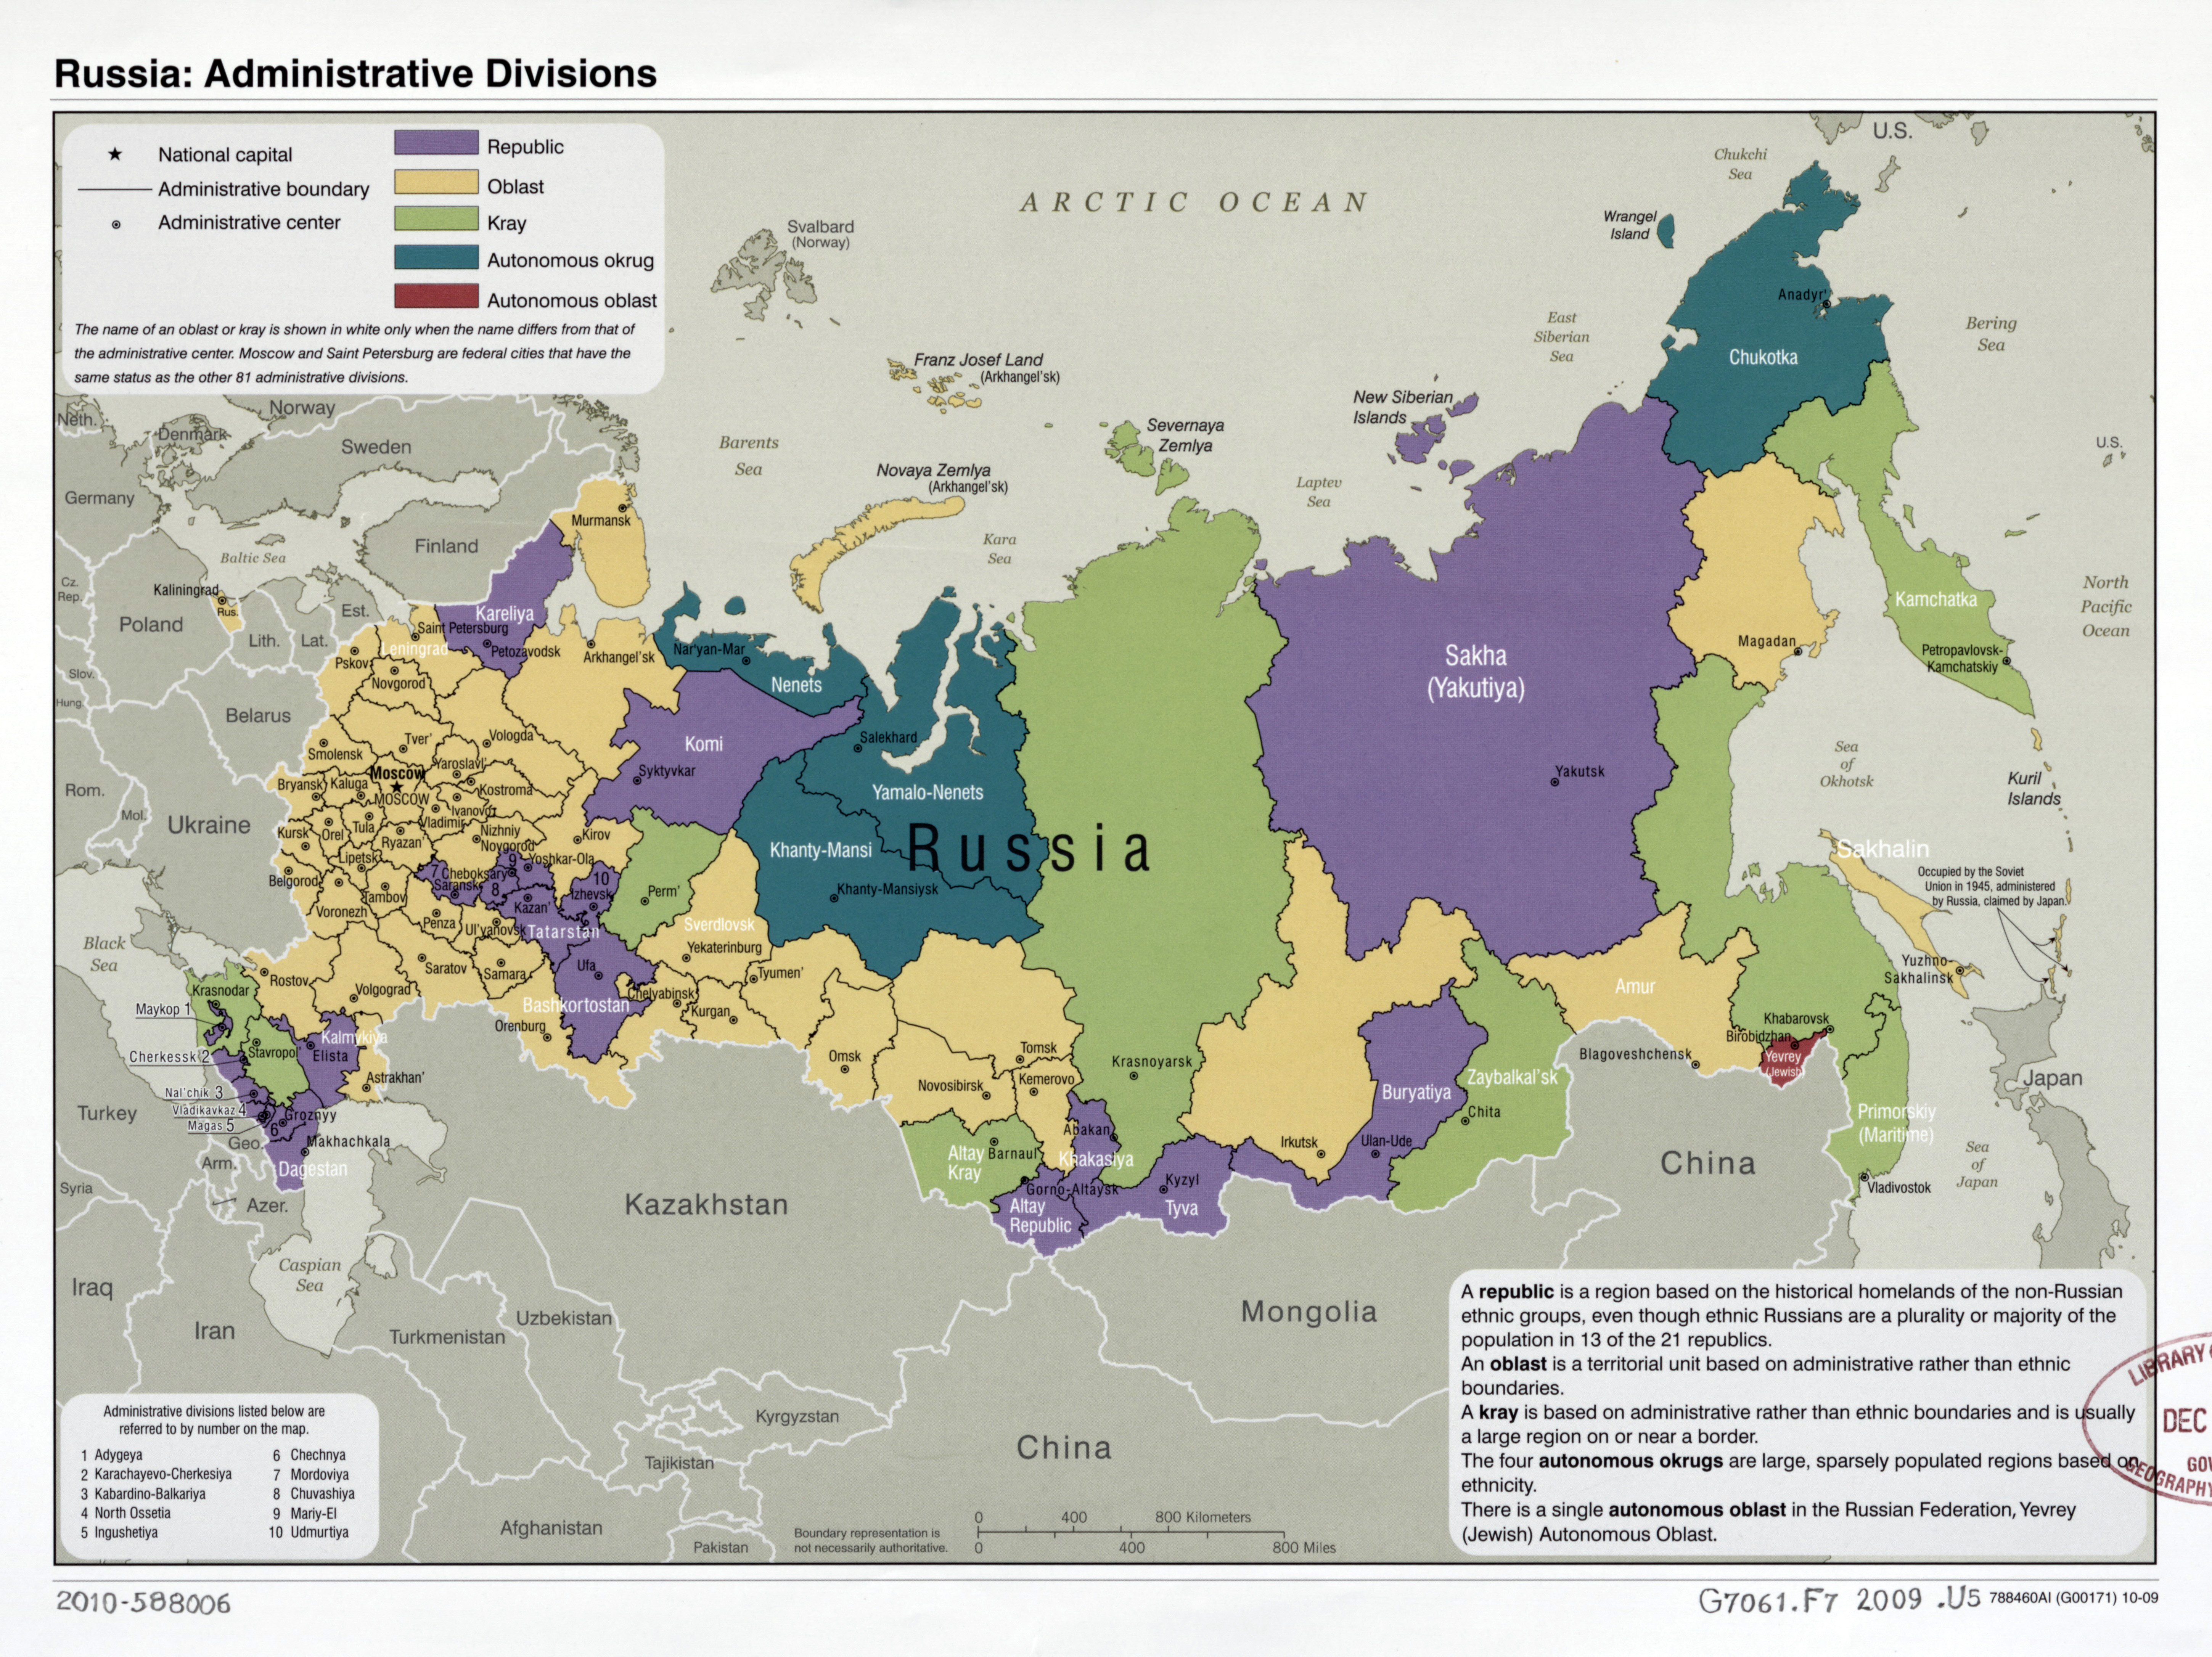 Large scale administrative divisions map of Russia  2009  Russia  Europe  Mapsland  Maps of 